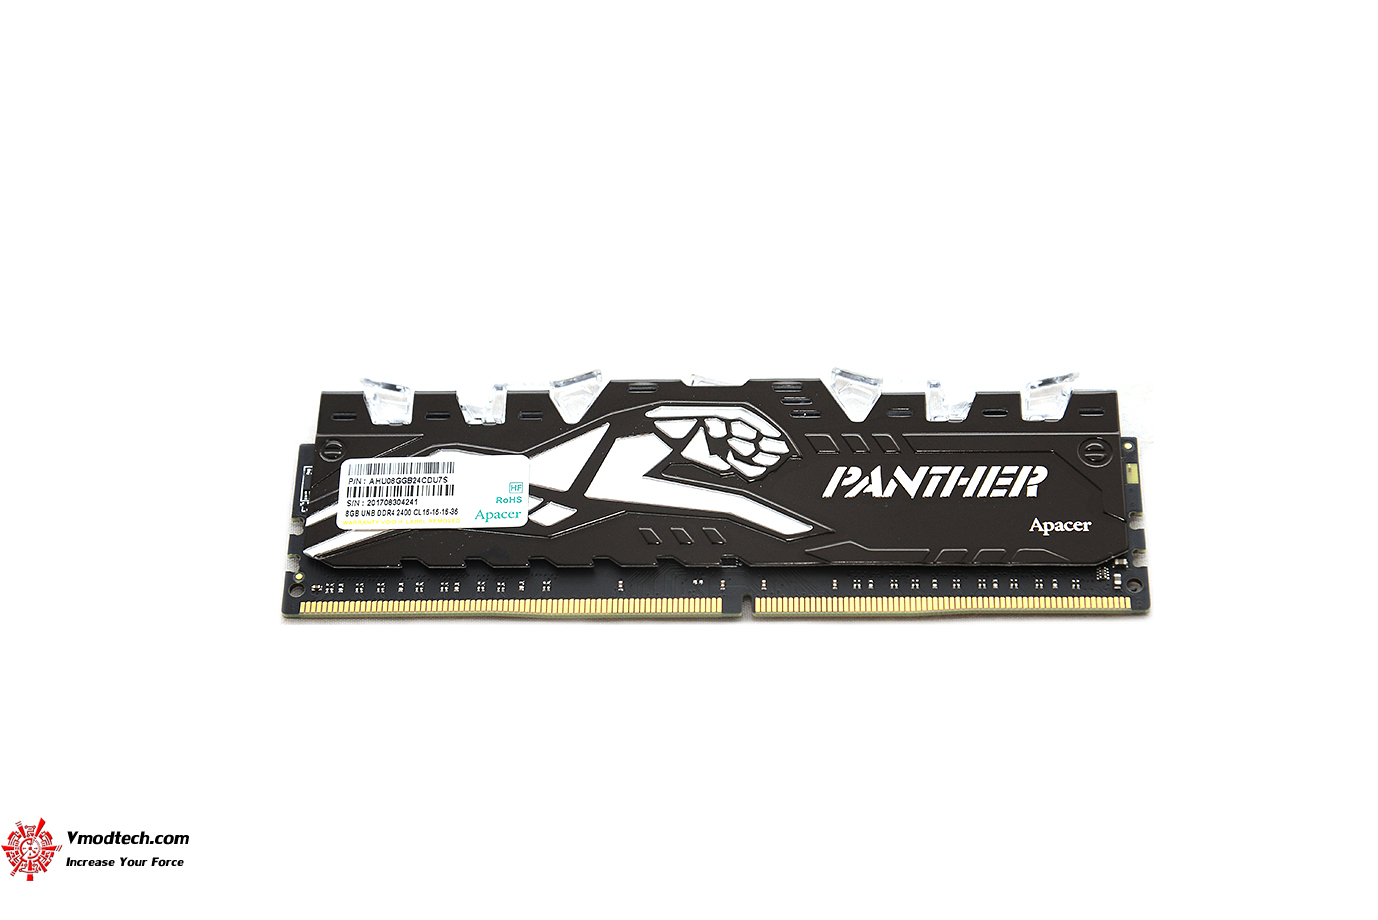 dsc 1344 Apacer Panther Rage Illumination DDR4 2400 16GB Review 